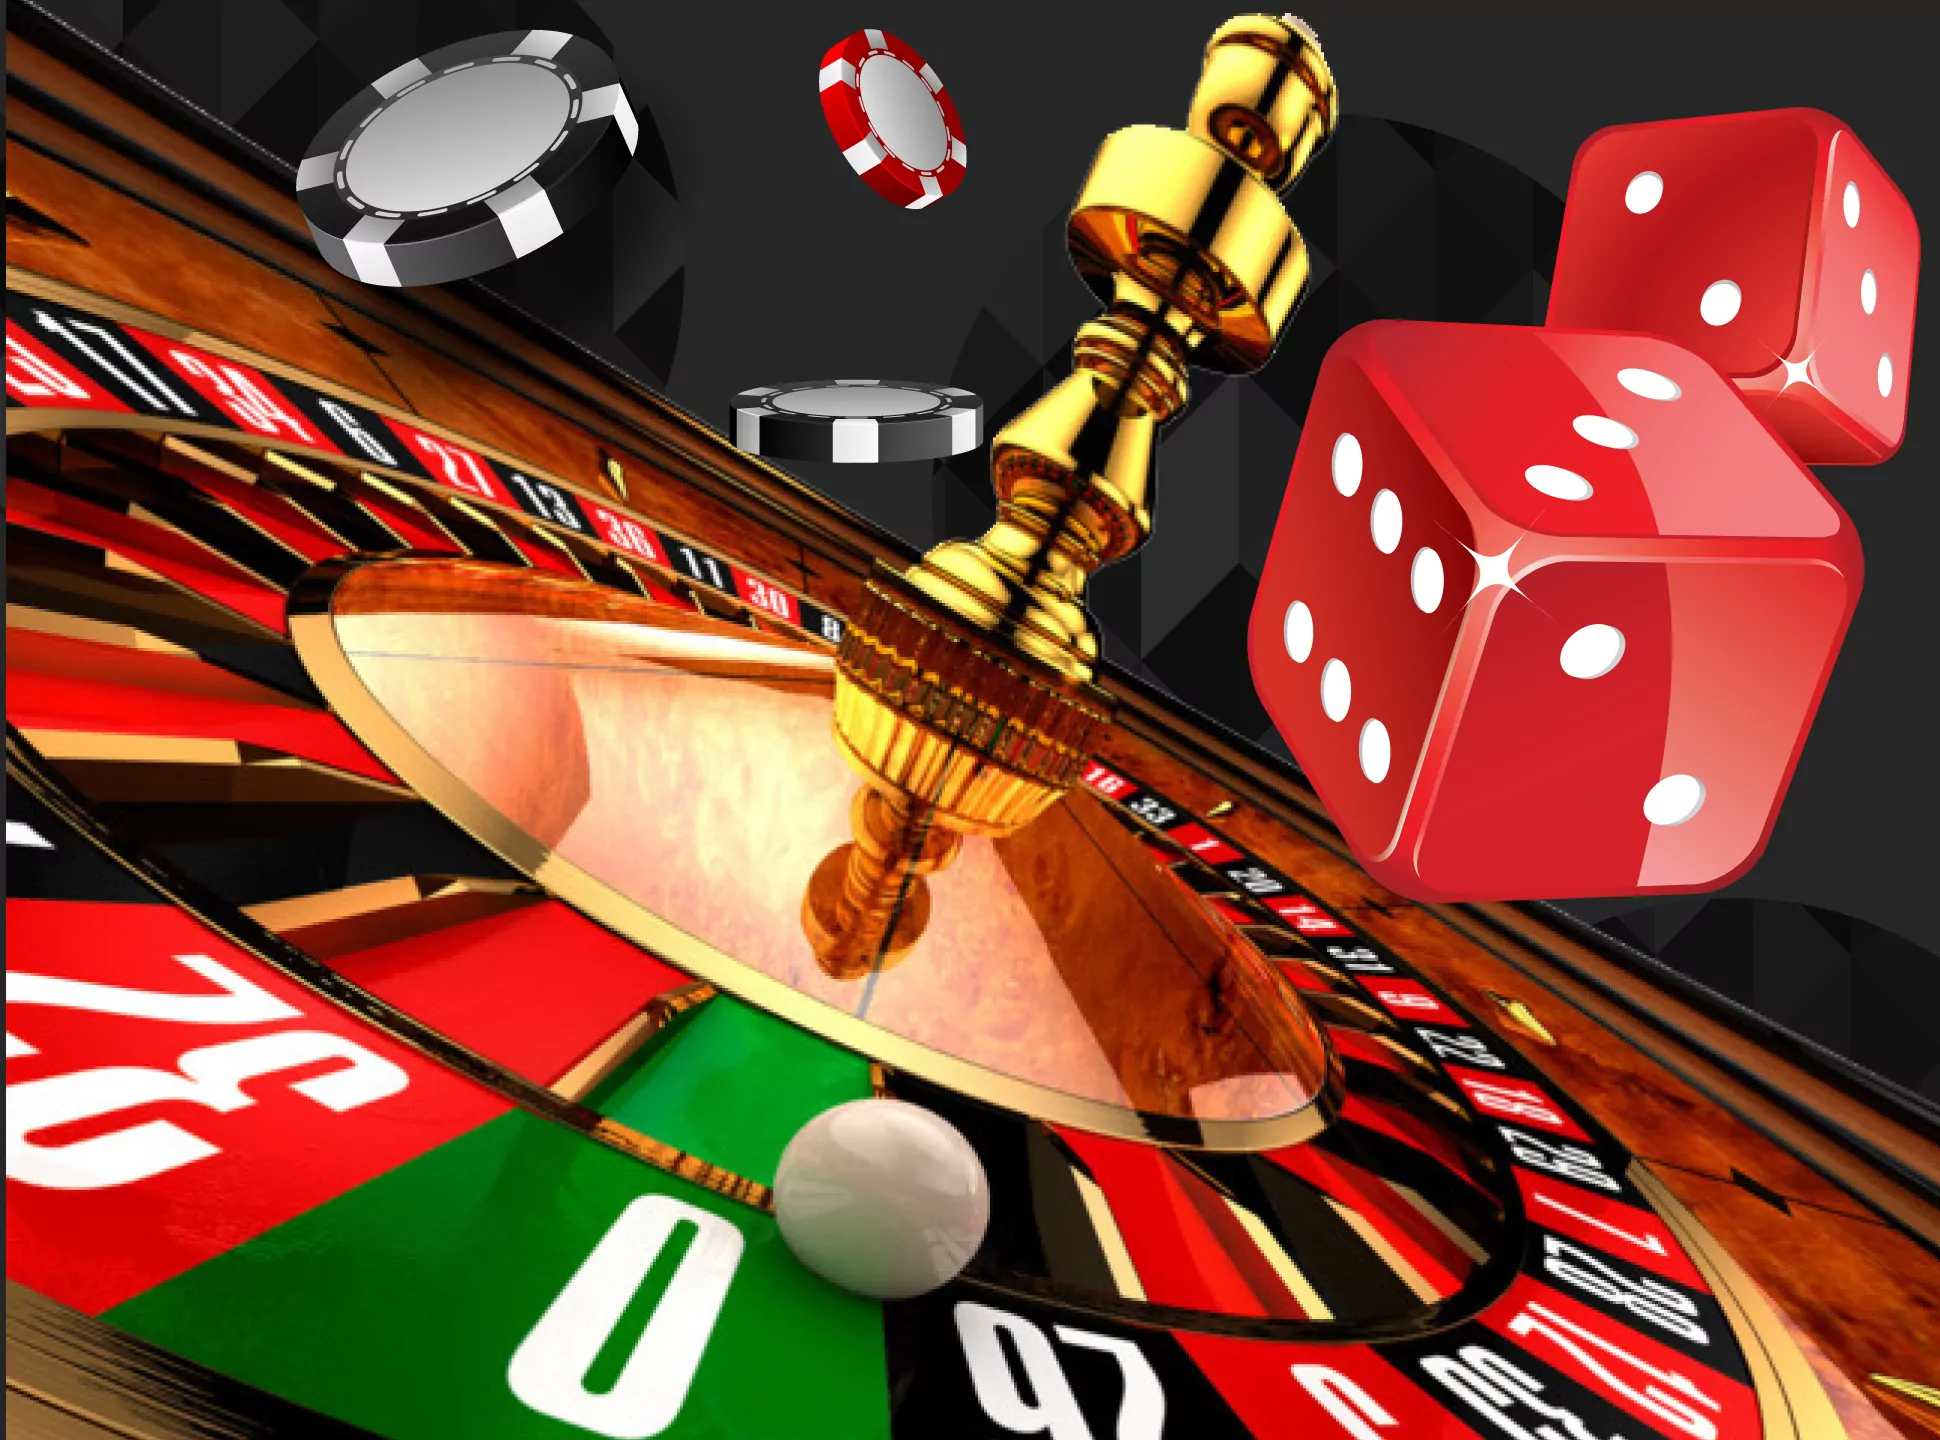 Roulette is one of the most popular casino games.